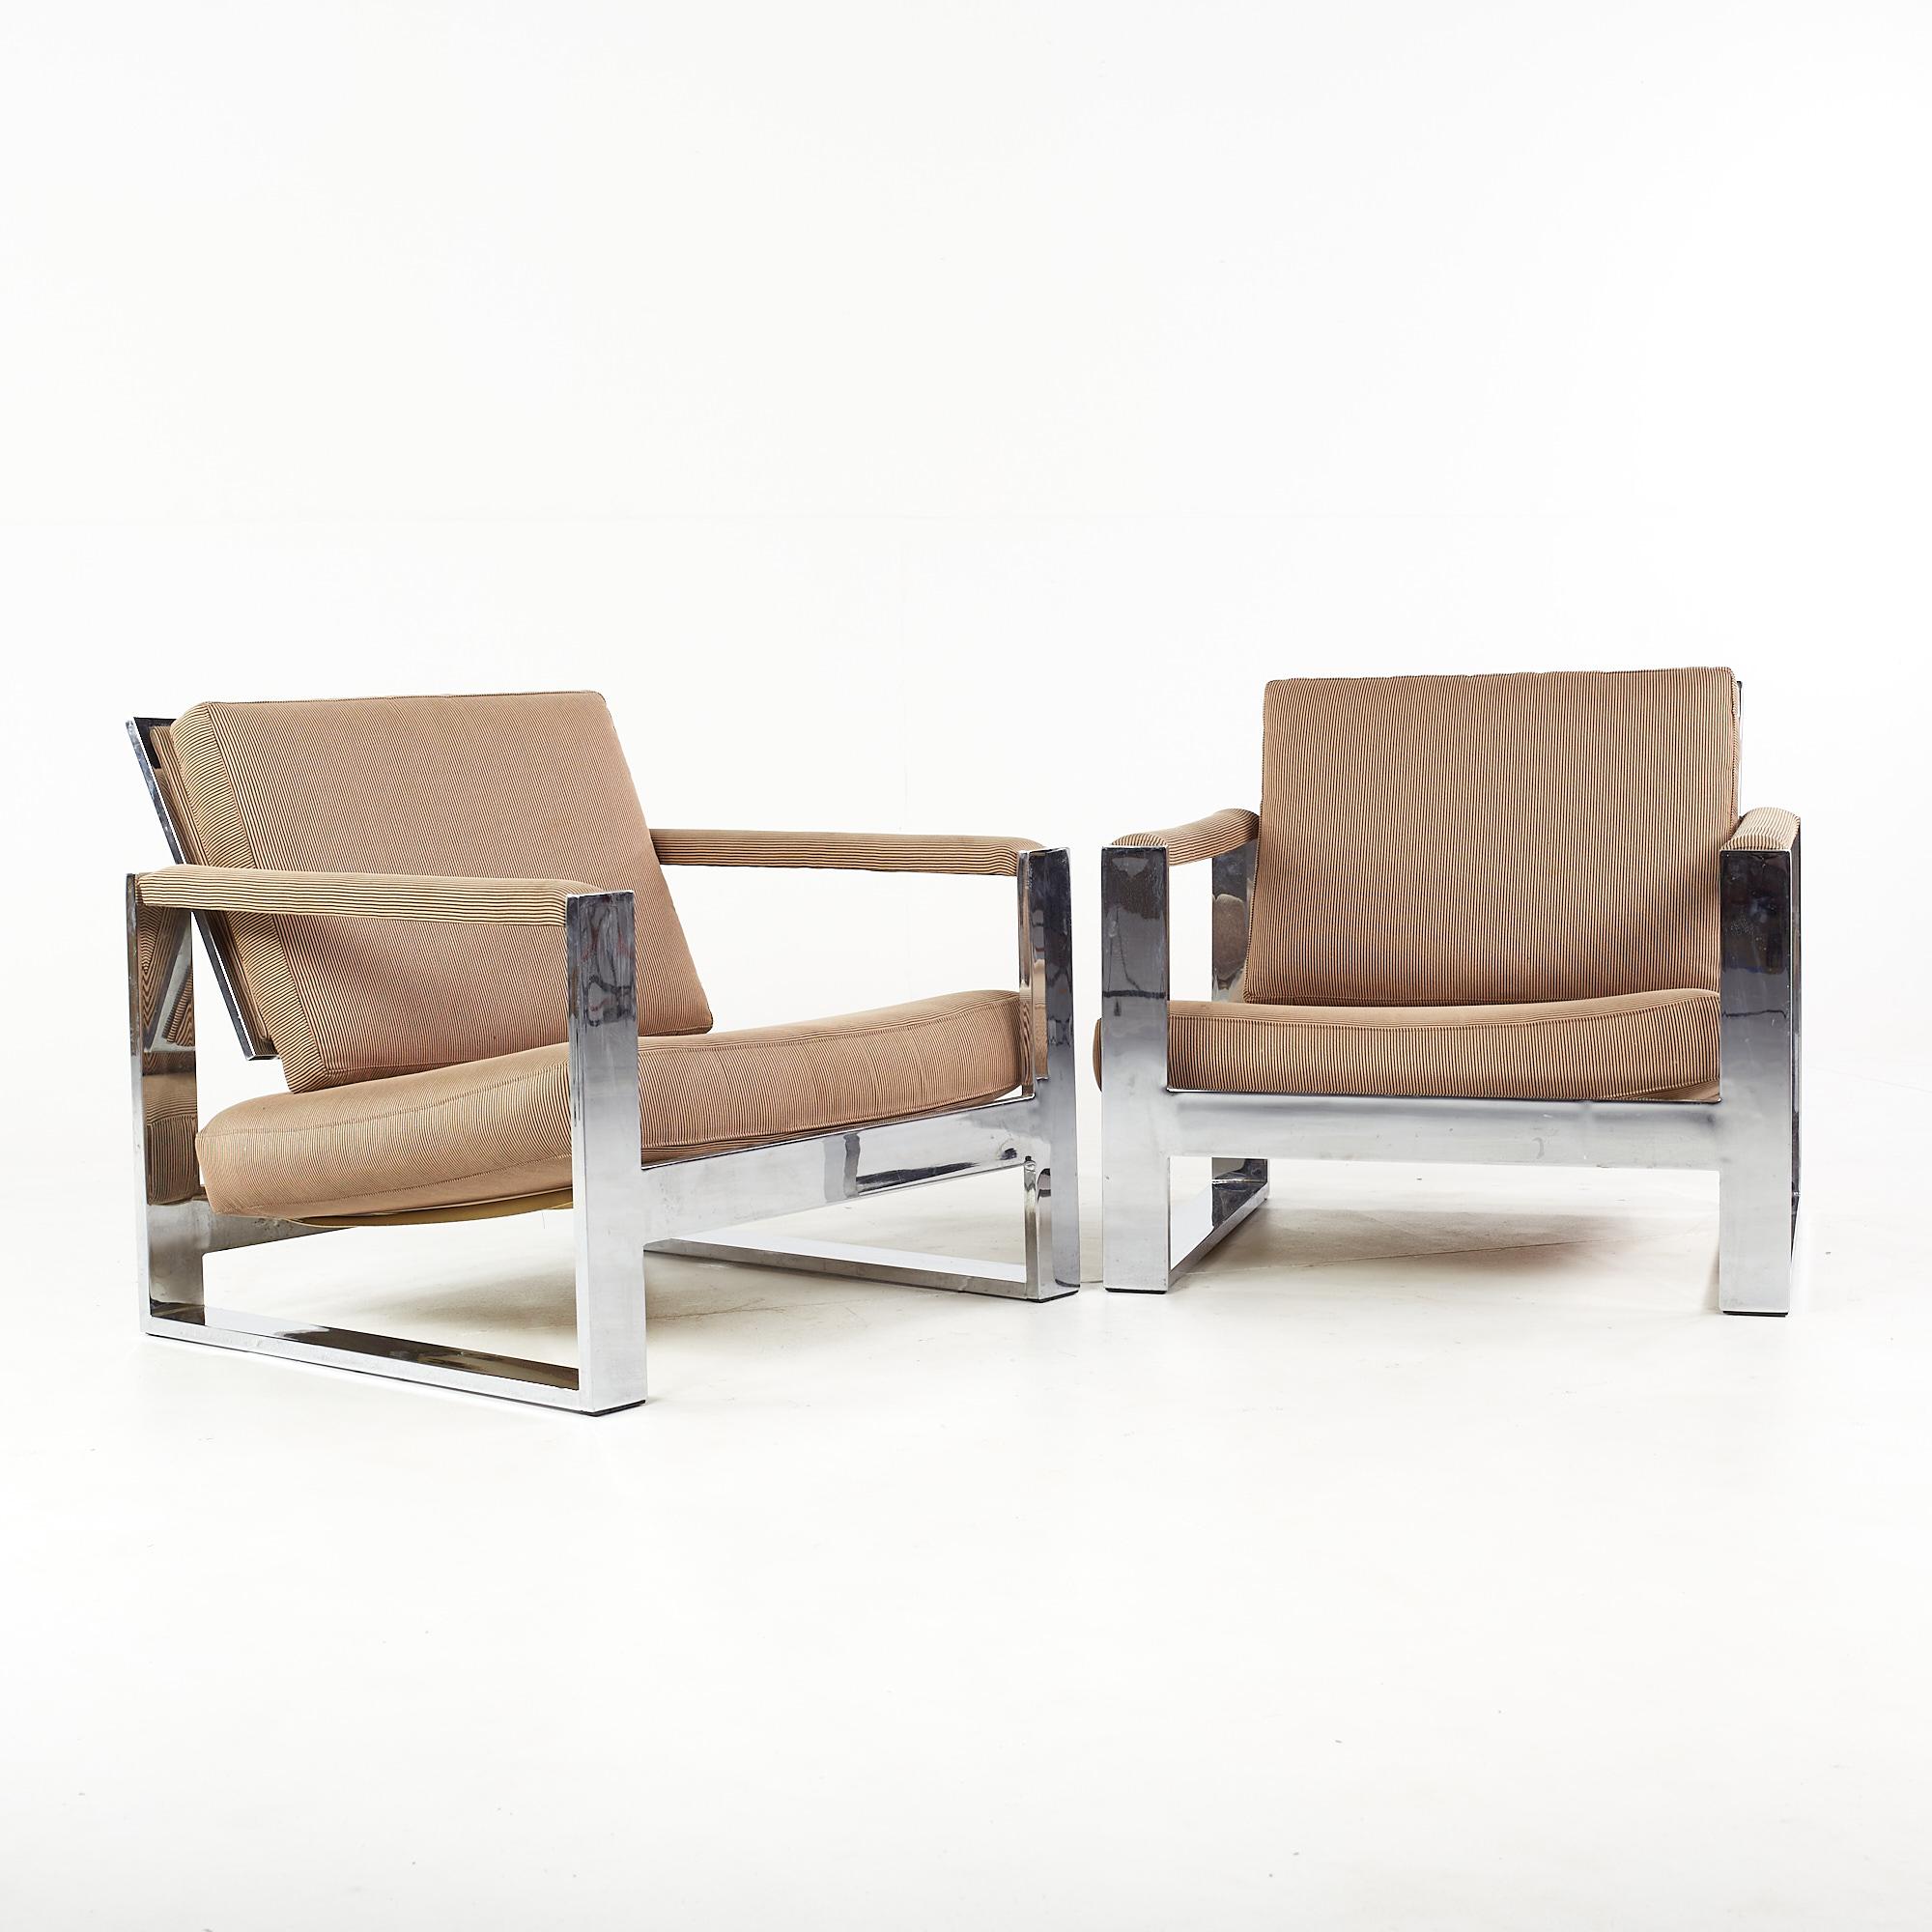 Milo Baughman Mid Century Tank Chrome Flat Bar Lounge Chairs - Pair

Each chair measures: 30.5 wide x 32 deep x 27 high, with a seat height of 12.5 and arm height of 20.5 inches

All pieces of furniture can be had in what we call restored vintage